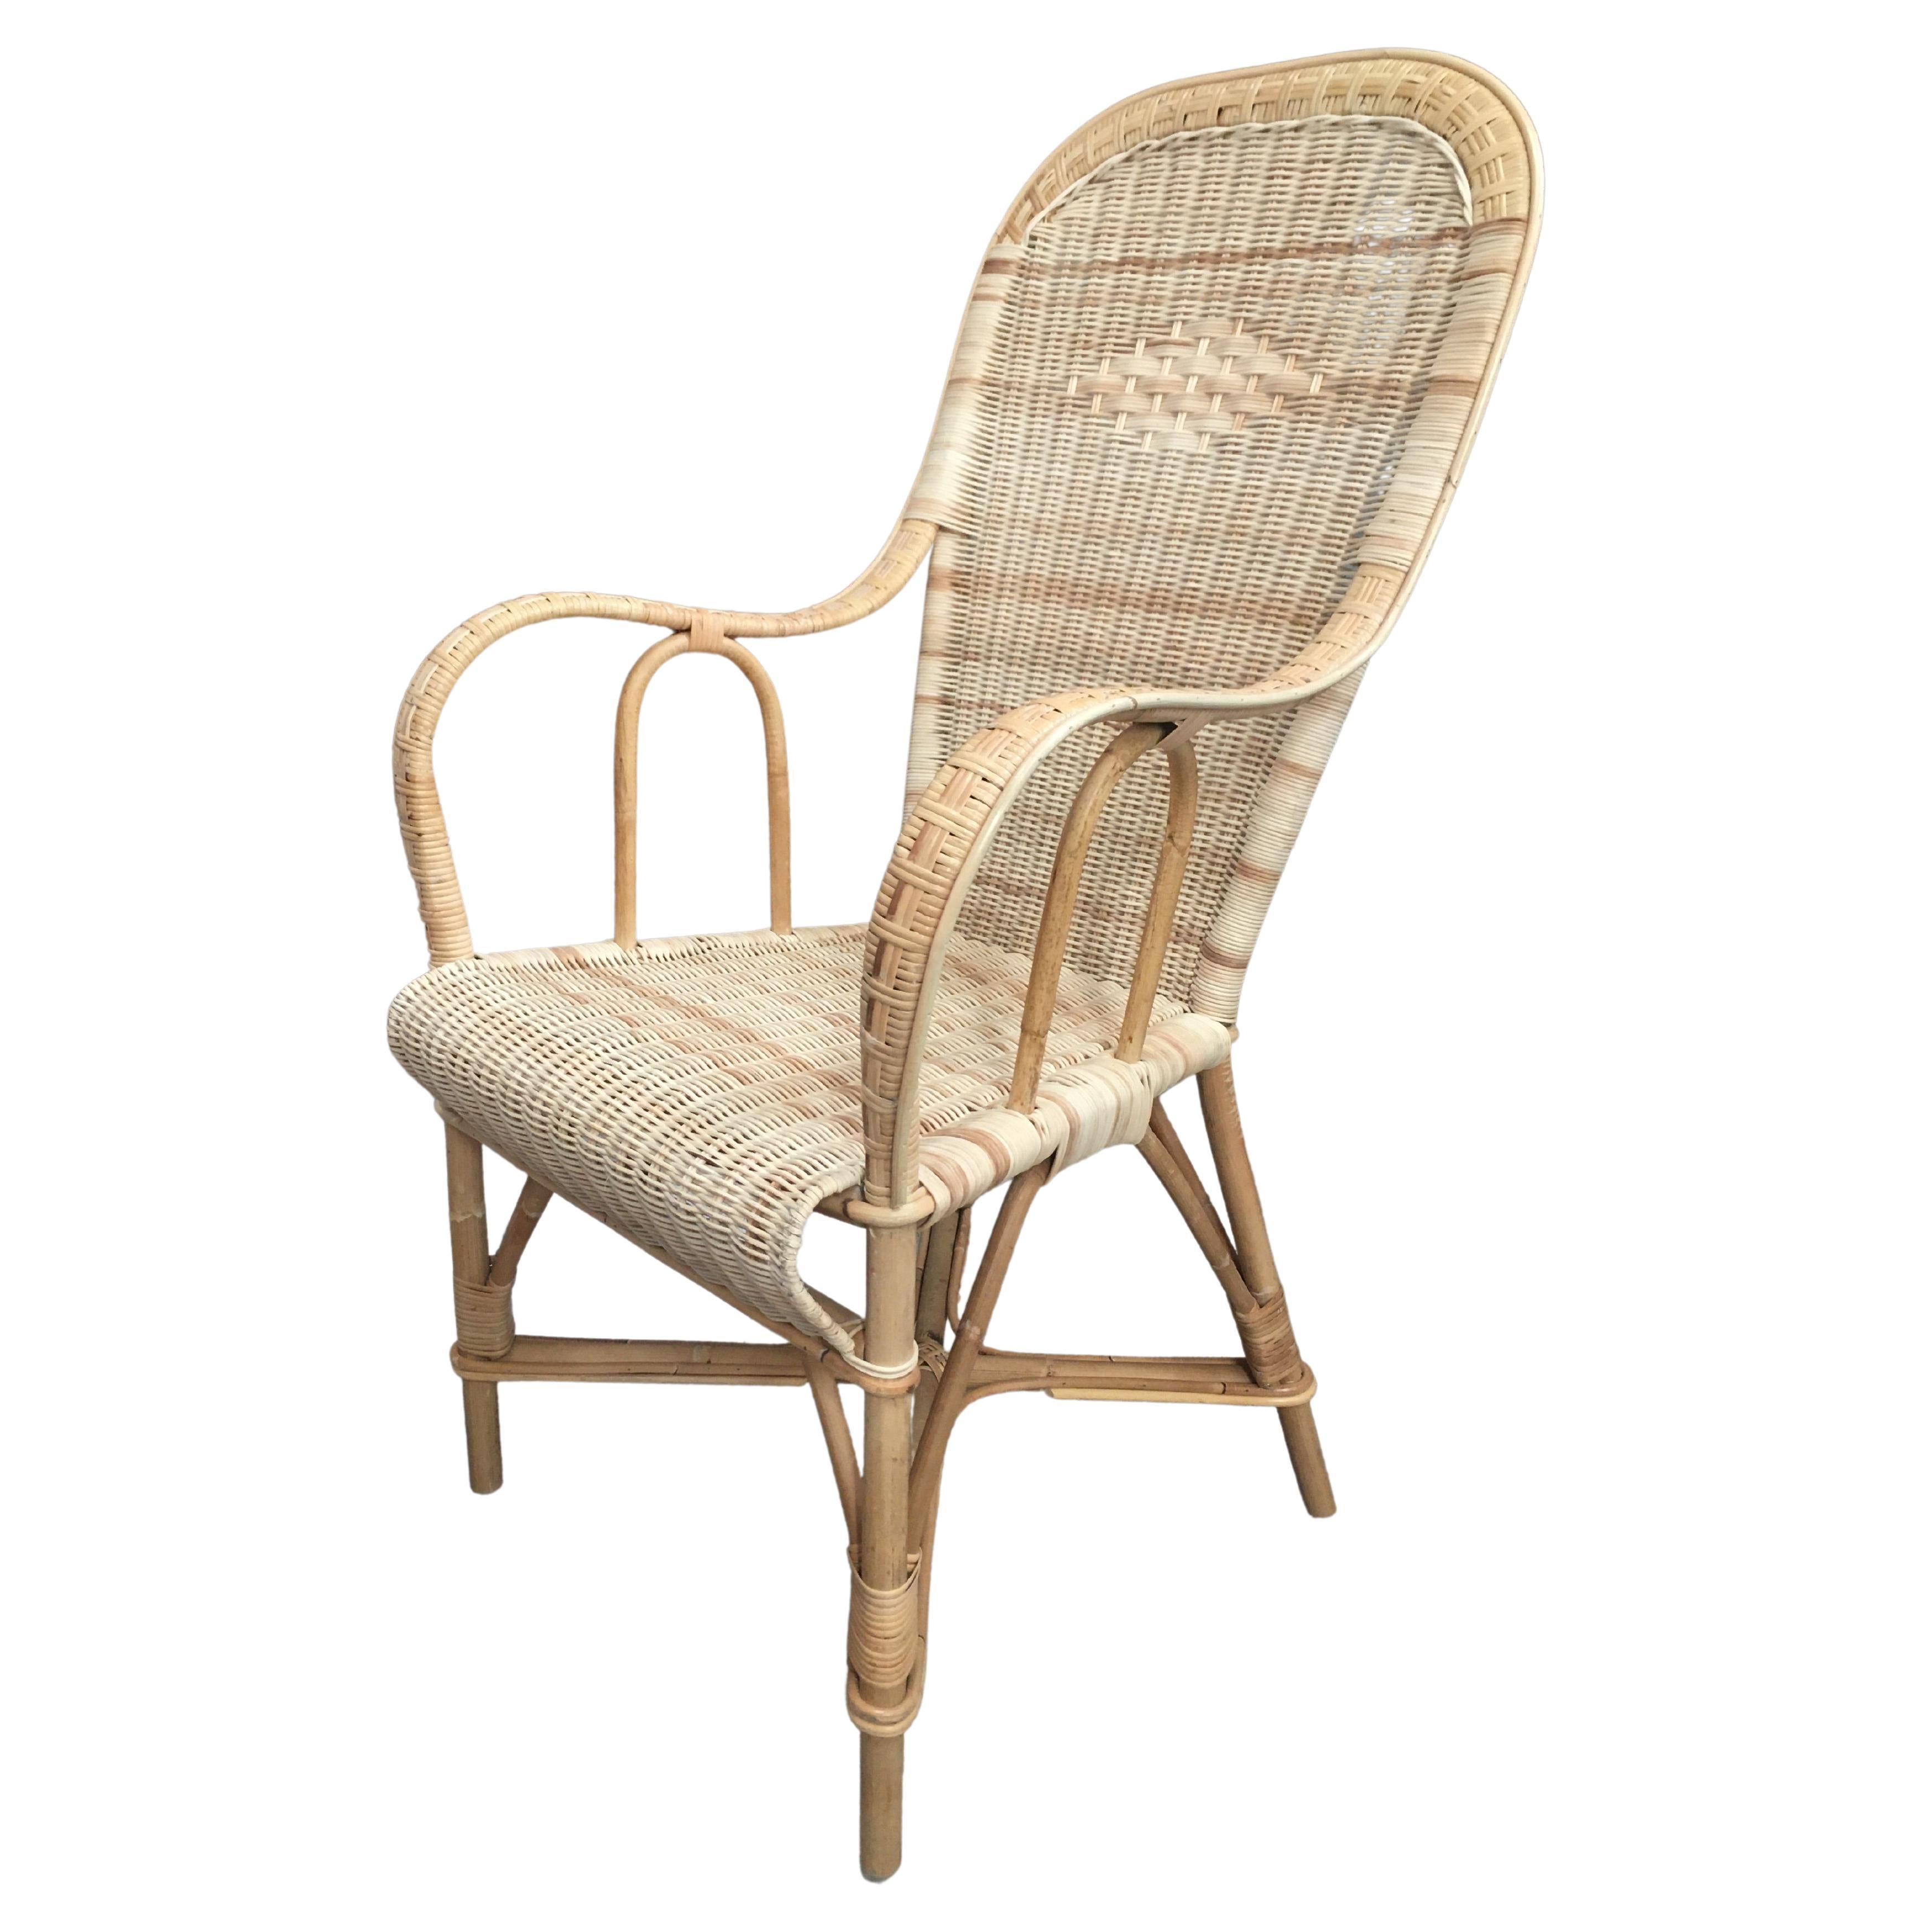 French 1900s Design Rattan and Braided Rattan Wicker Cane Armchair